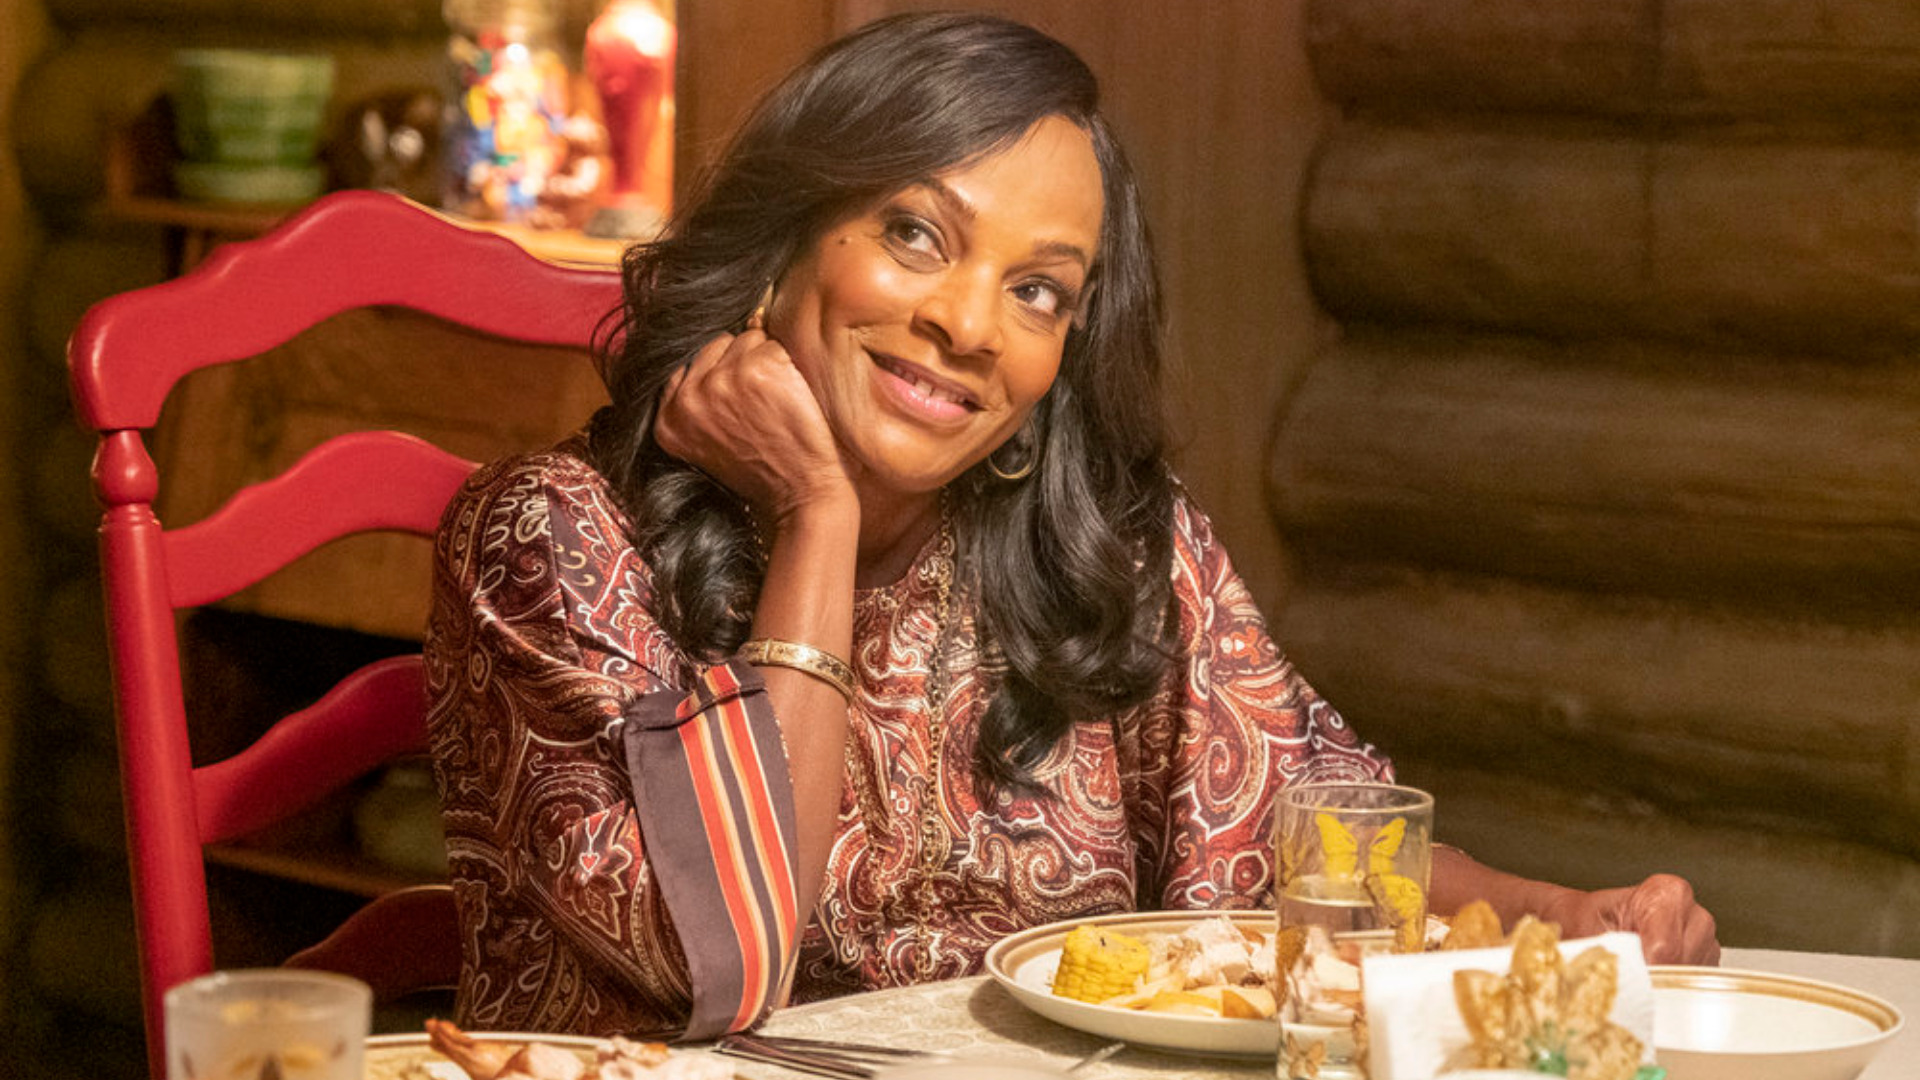 ‘This Is Us’: Was Edie the Only Character in the White Car? Some Fans Aren’t Sure About the Season 6 Flash-Forward Scene